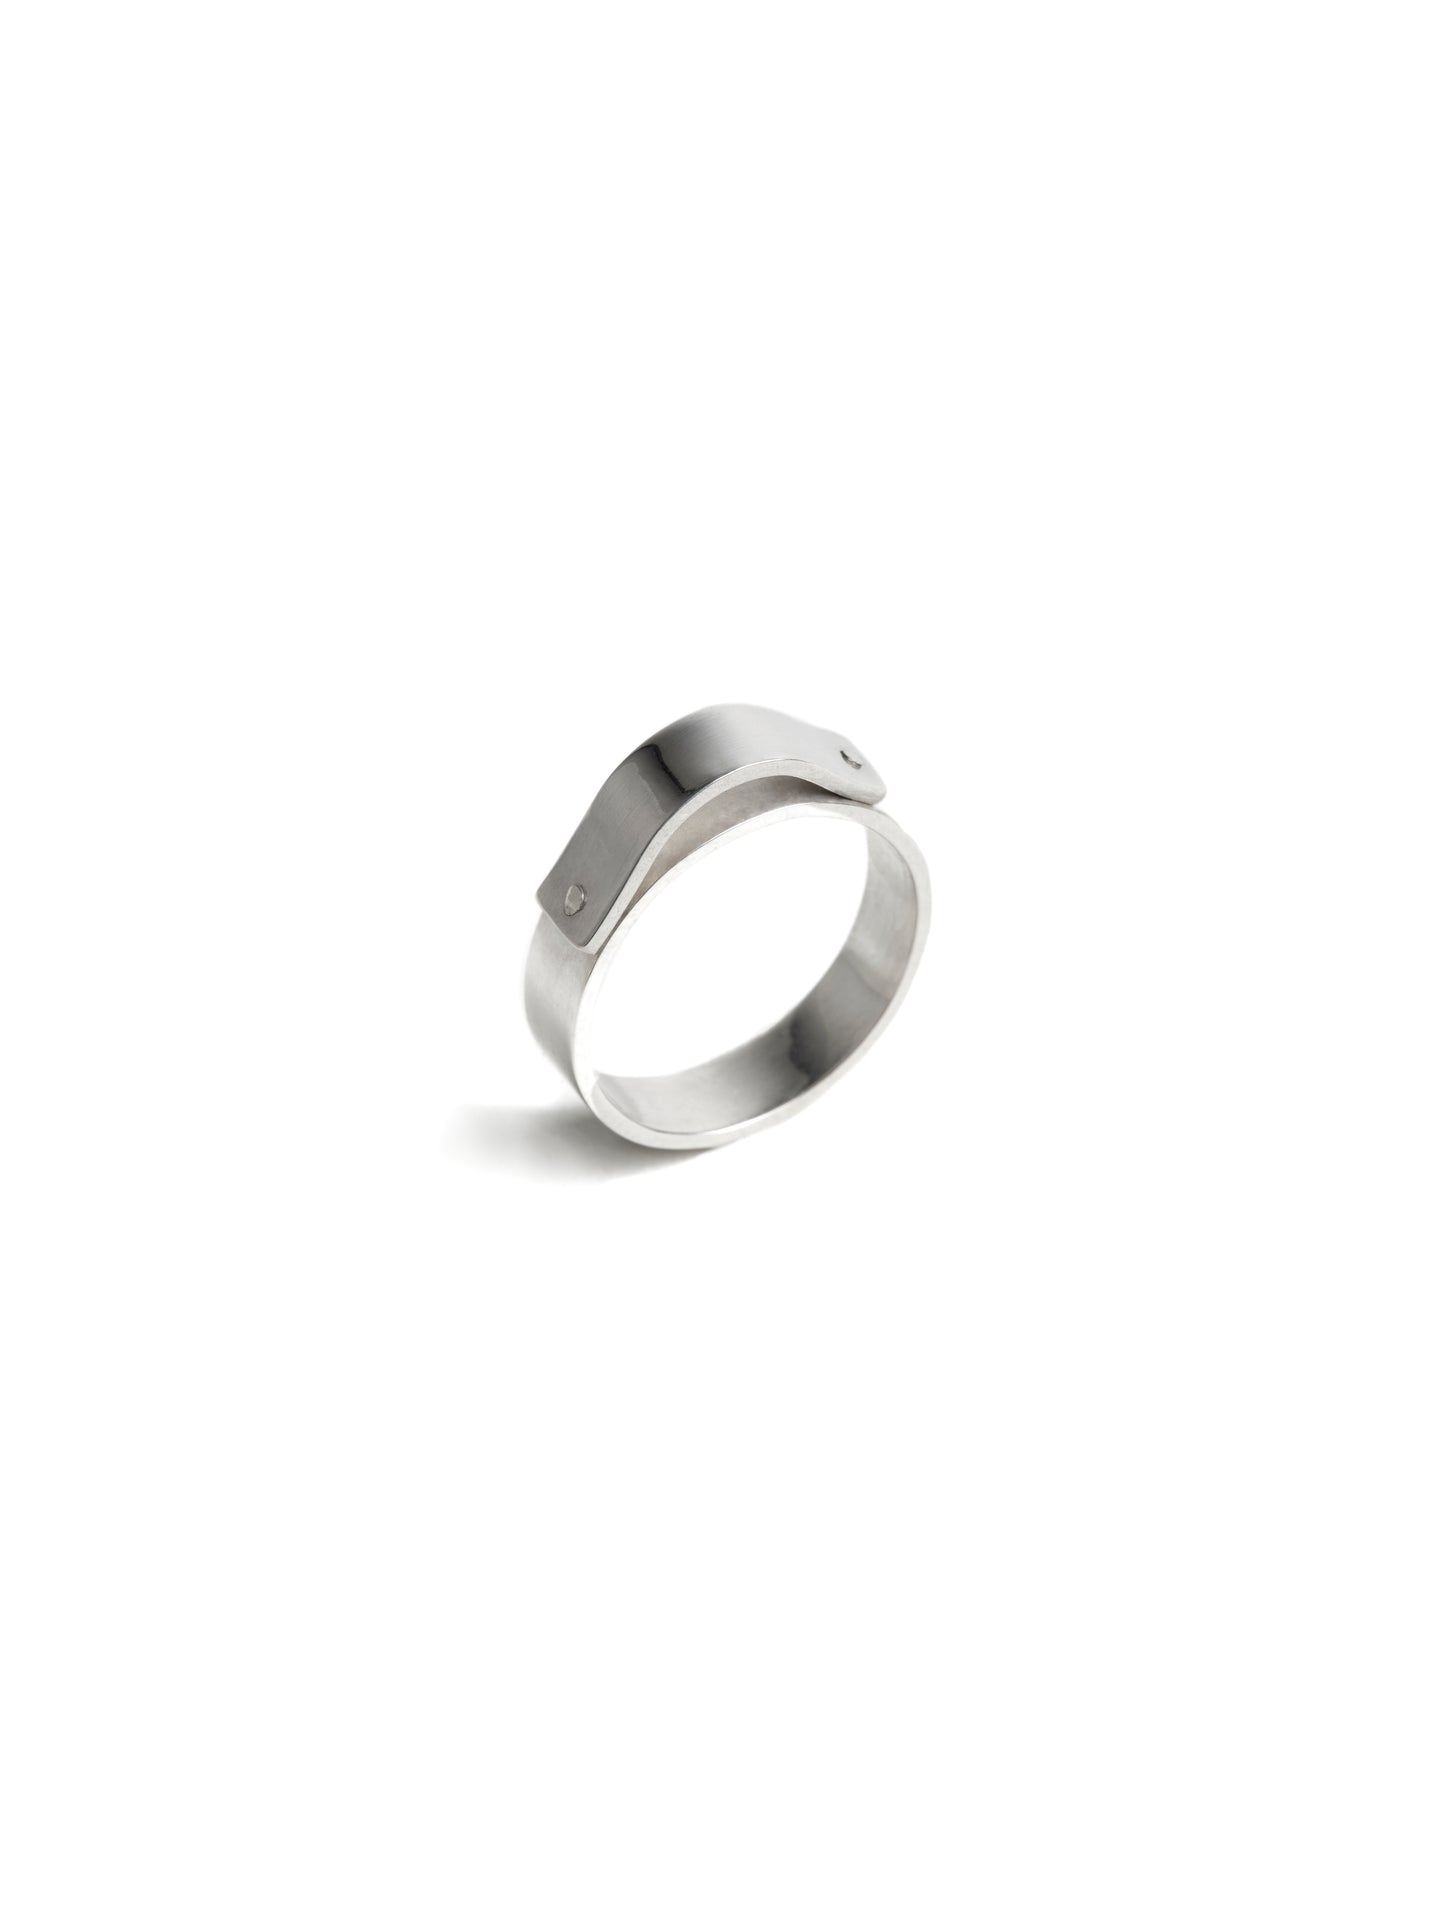 WIDE SILVER CURVED RING